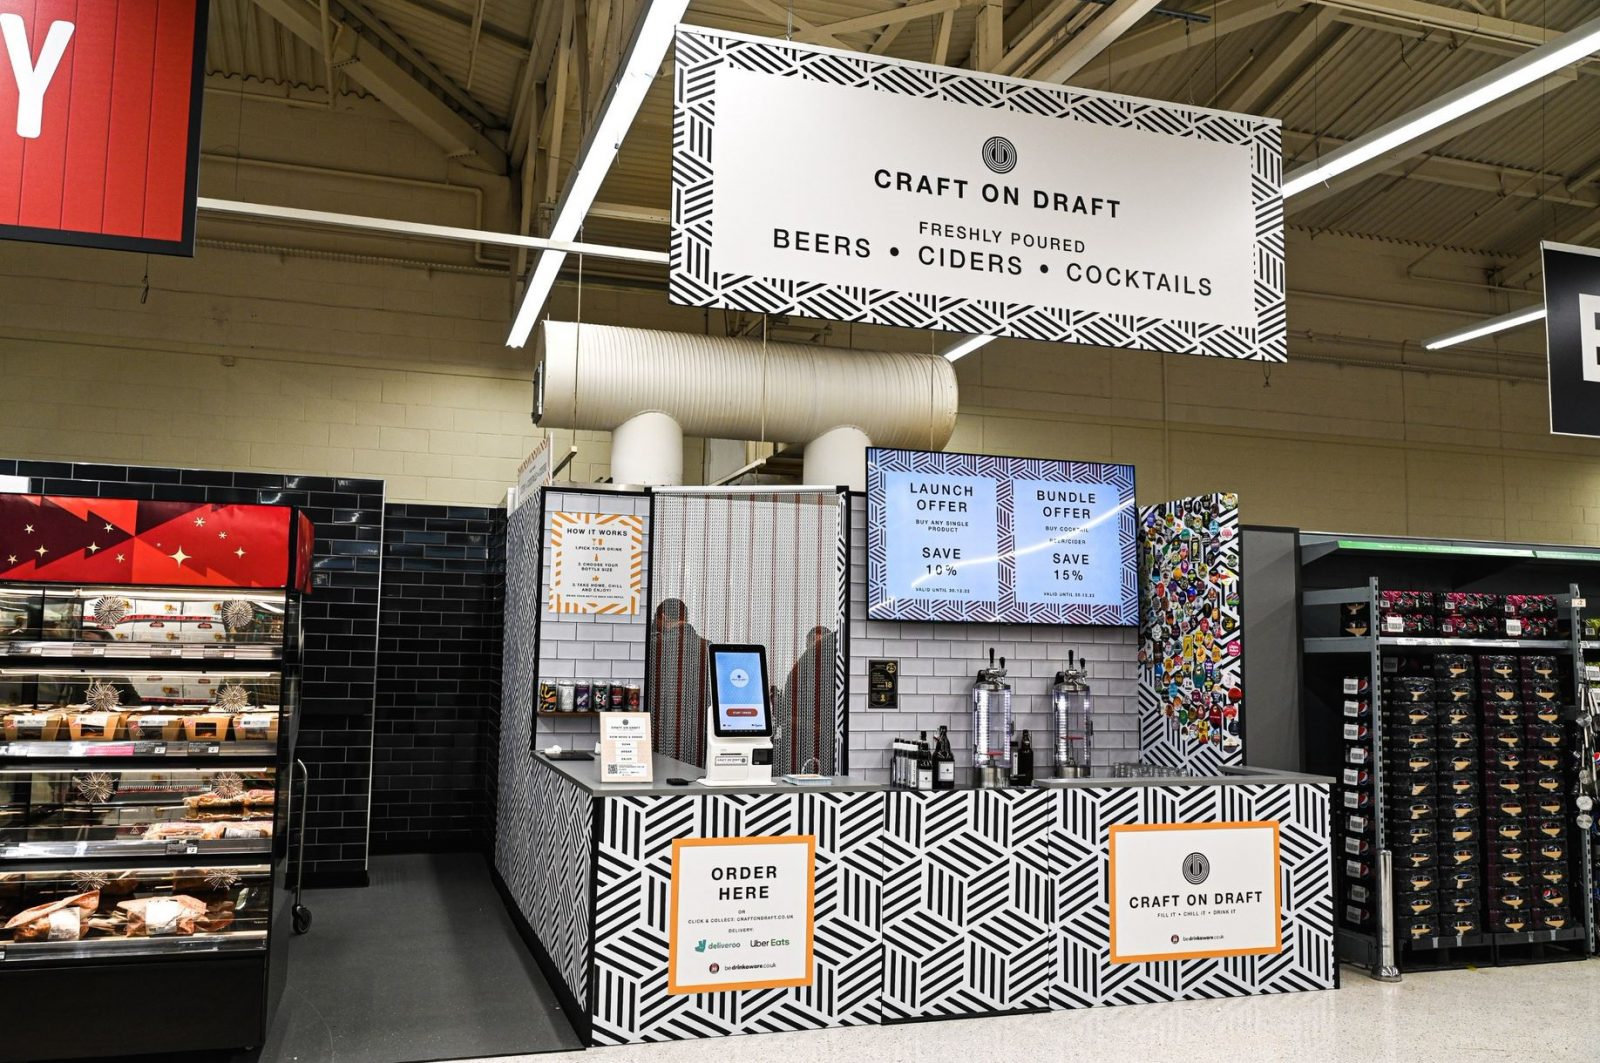 stand with craft on draft sign.